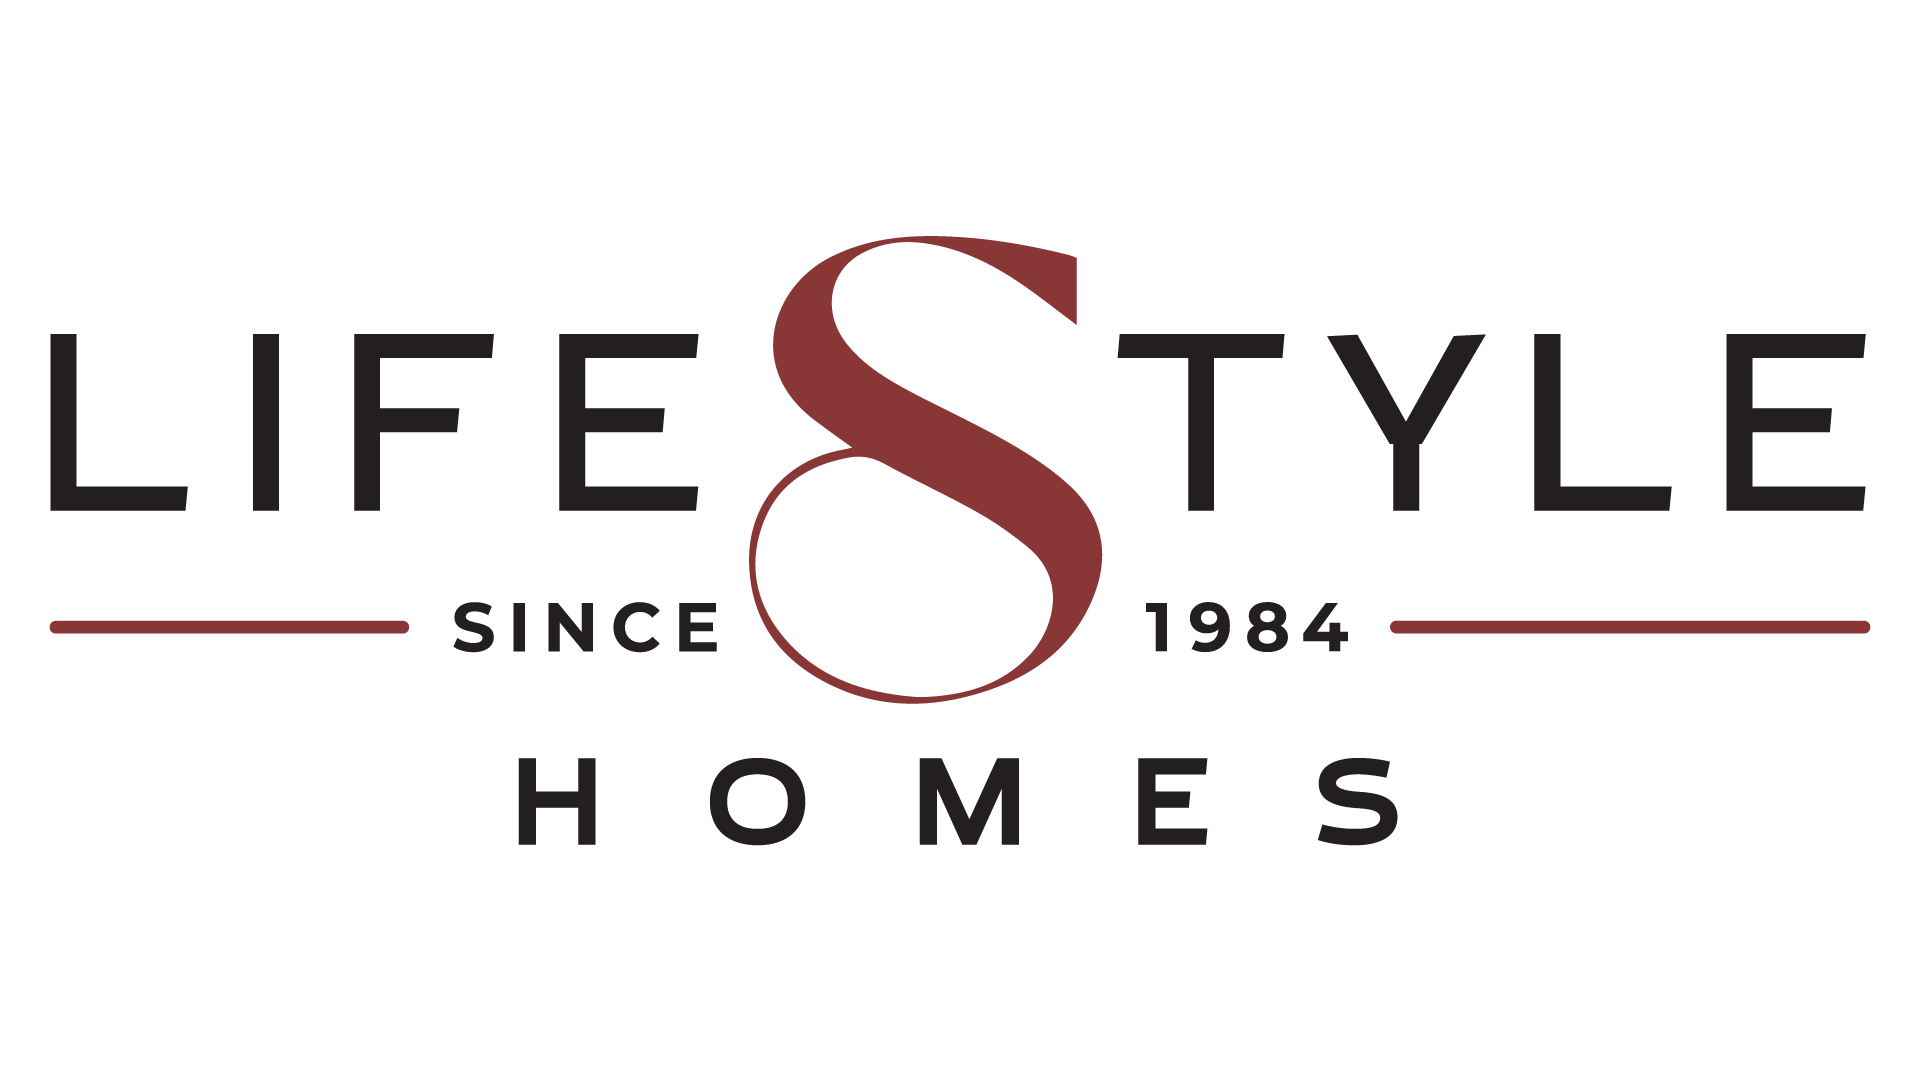 LifeStyle Homes Logo/link to website